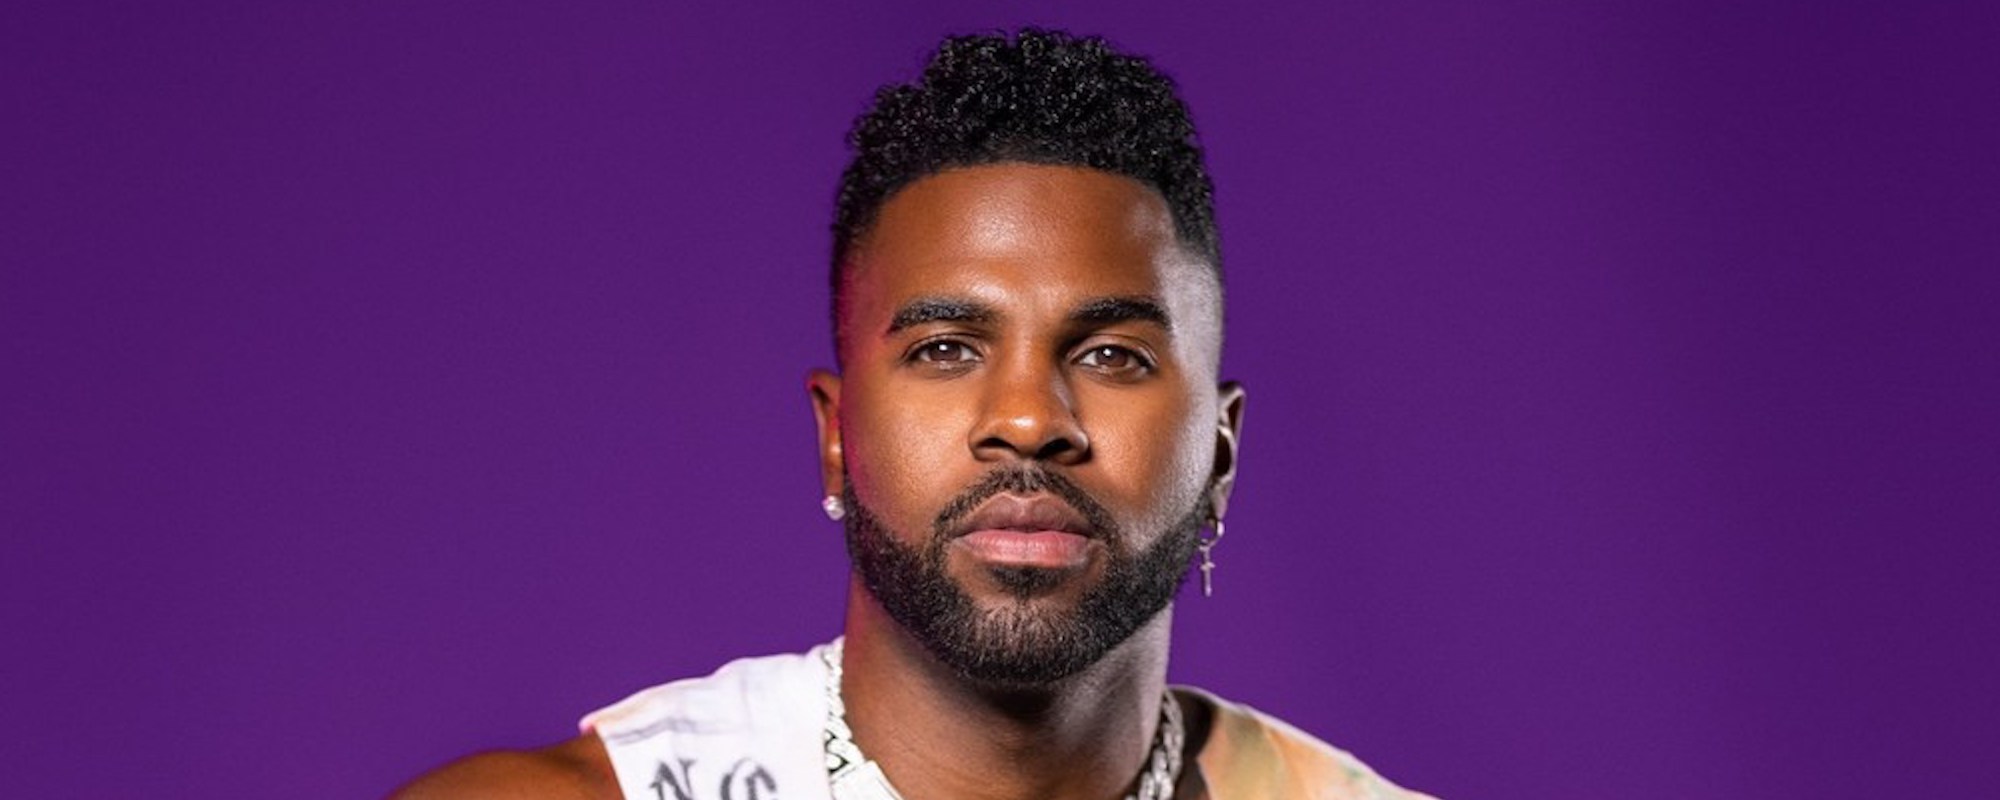 Jason Derulo Allegedly Spends $30k on Two-Year-Old Son’s Birthday Party